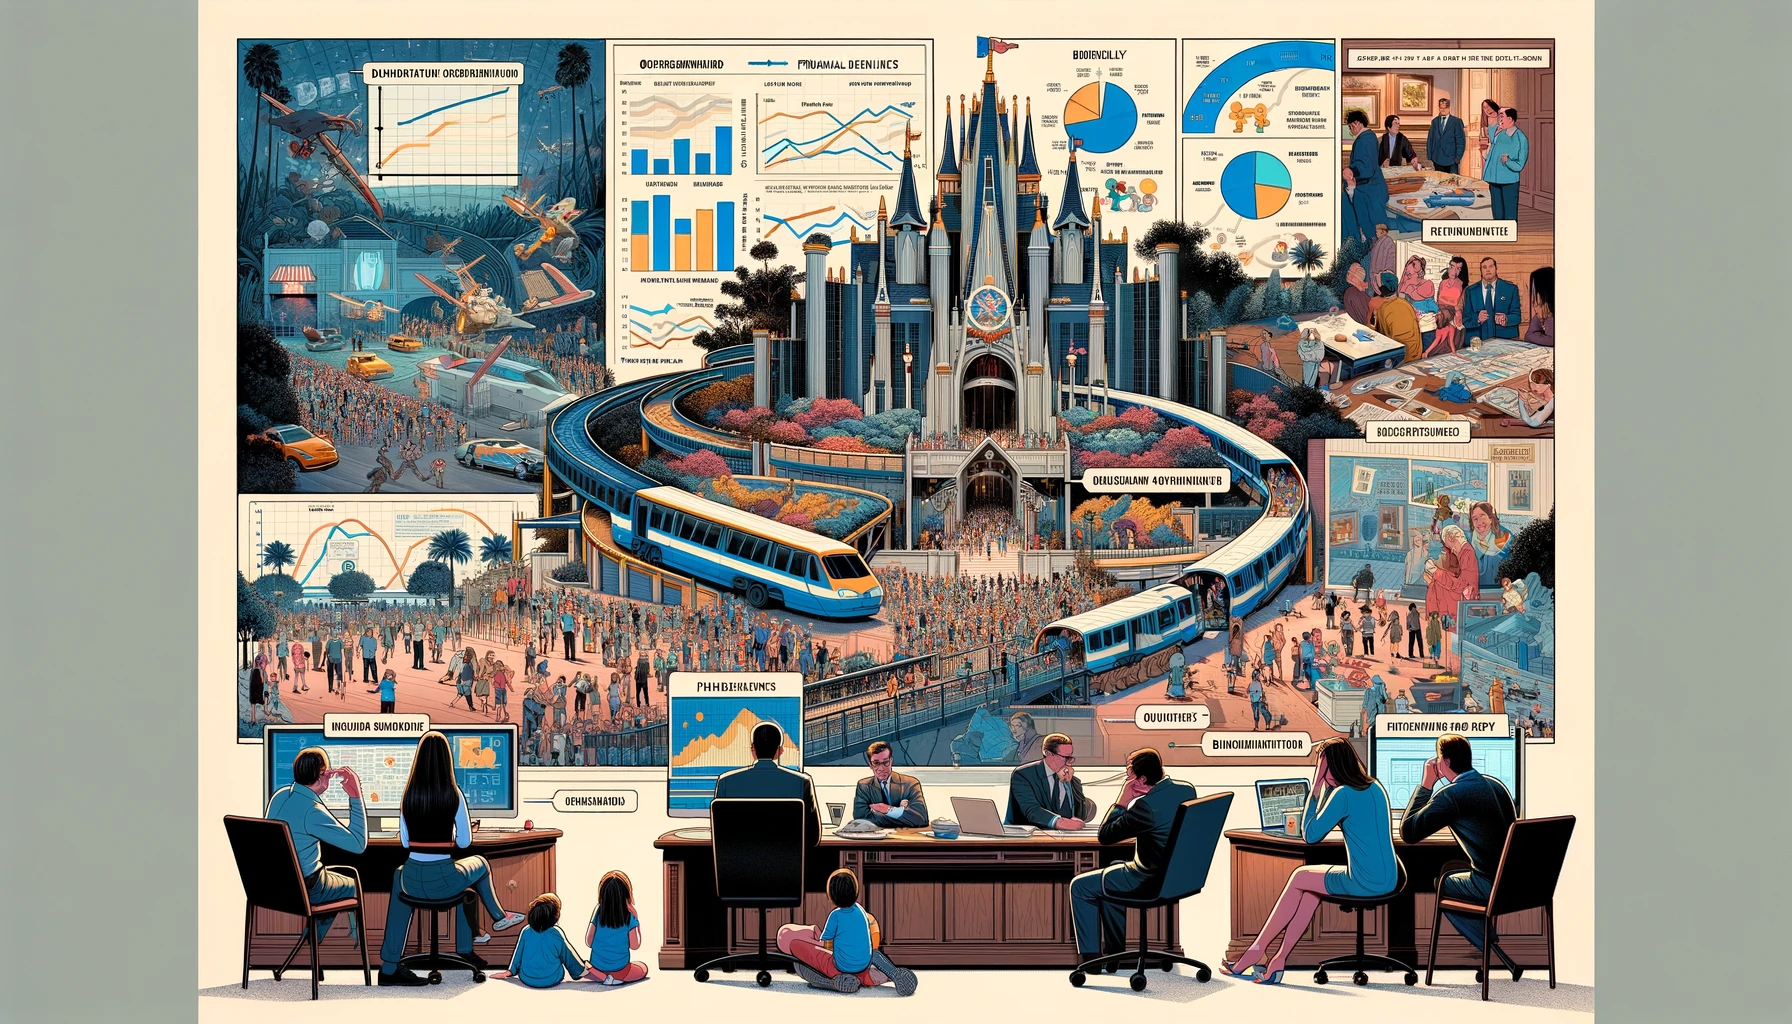 A complex visual collage representing the various reasons for the discontinuation of Disney annual passes. The image includes a series of interconnected vignettes: a crowded Disney park entrance showcasing overcrowding, a boardroom with Disney executives discussing financial difficulties with graphs and charts, and a family at home disappointedly reading the news of the discontinuation online. Each section should be detailed and clearly depict the challenges faced by the theme park.